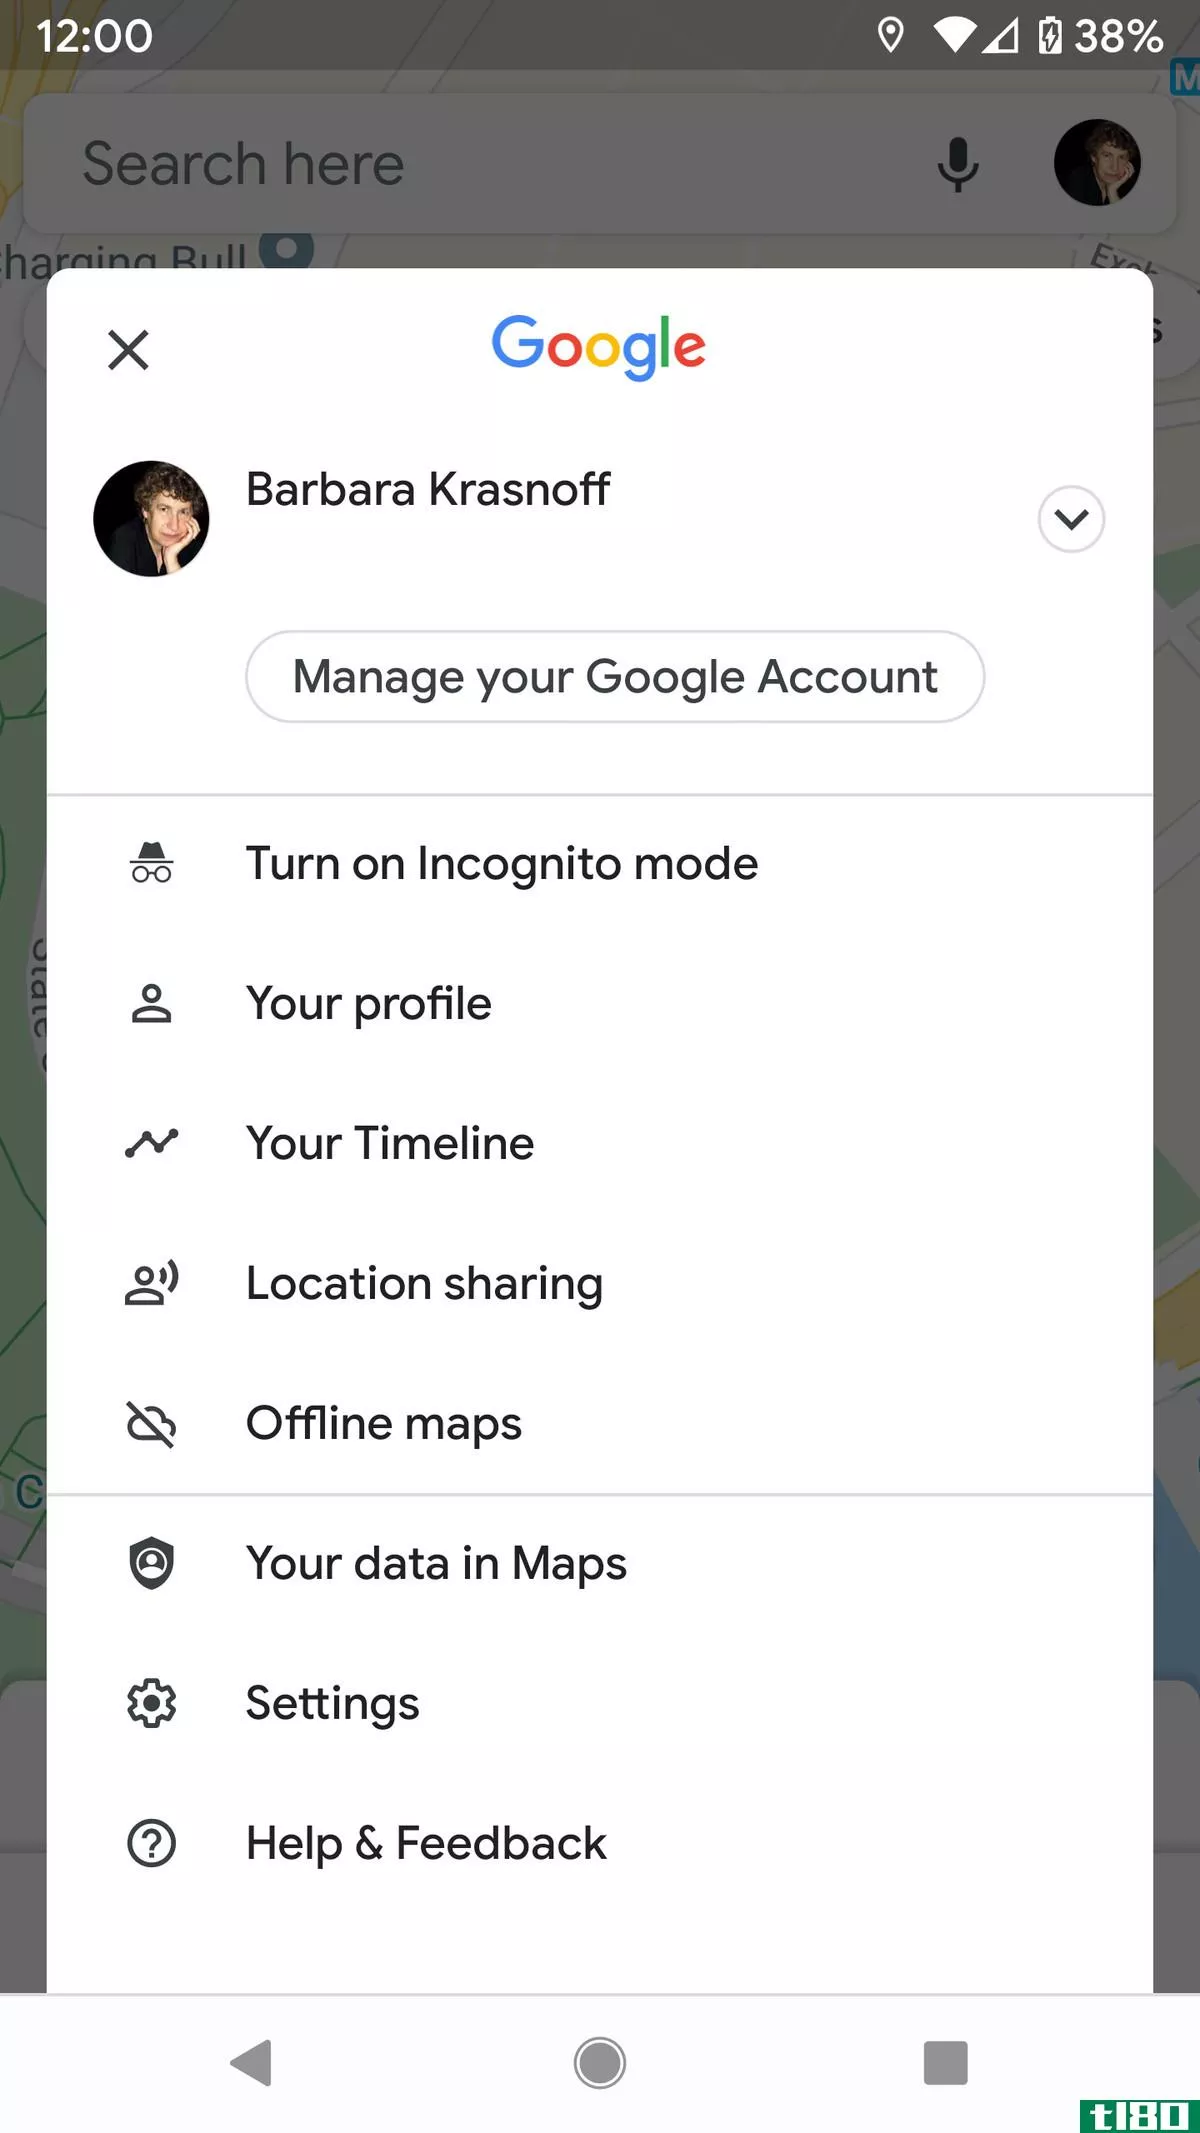 Go to “Location sharing” in your Maps app.